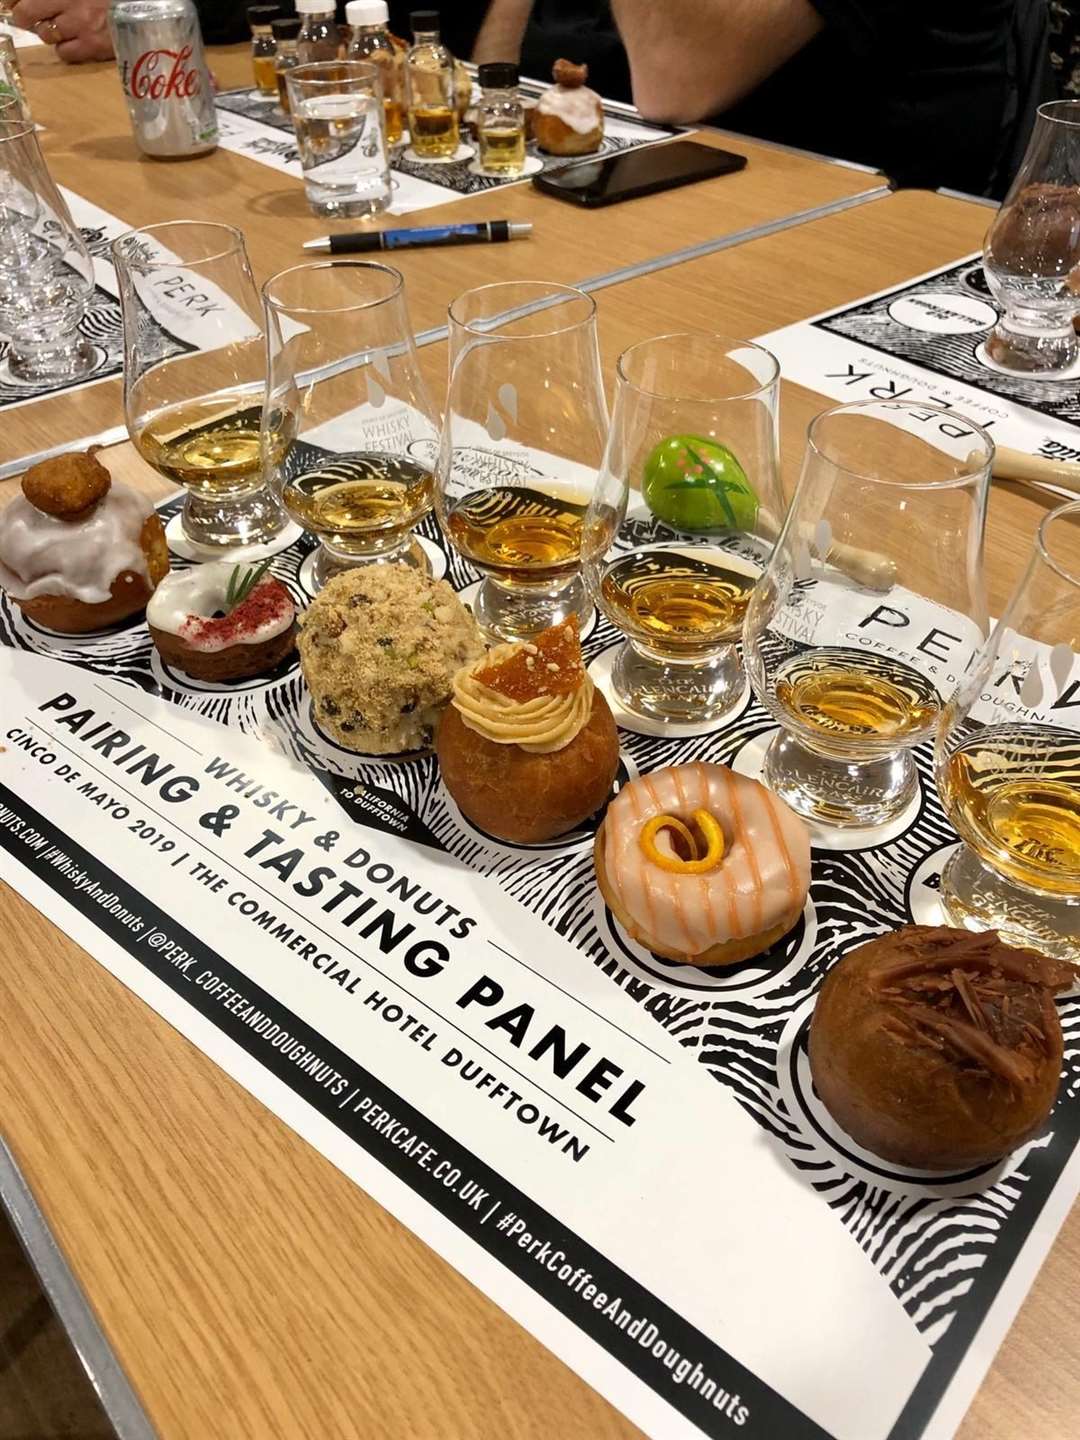 Whisky and doughnuts at the Speyside Whisky Festival in 2019.